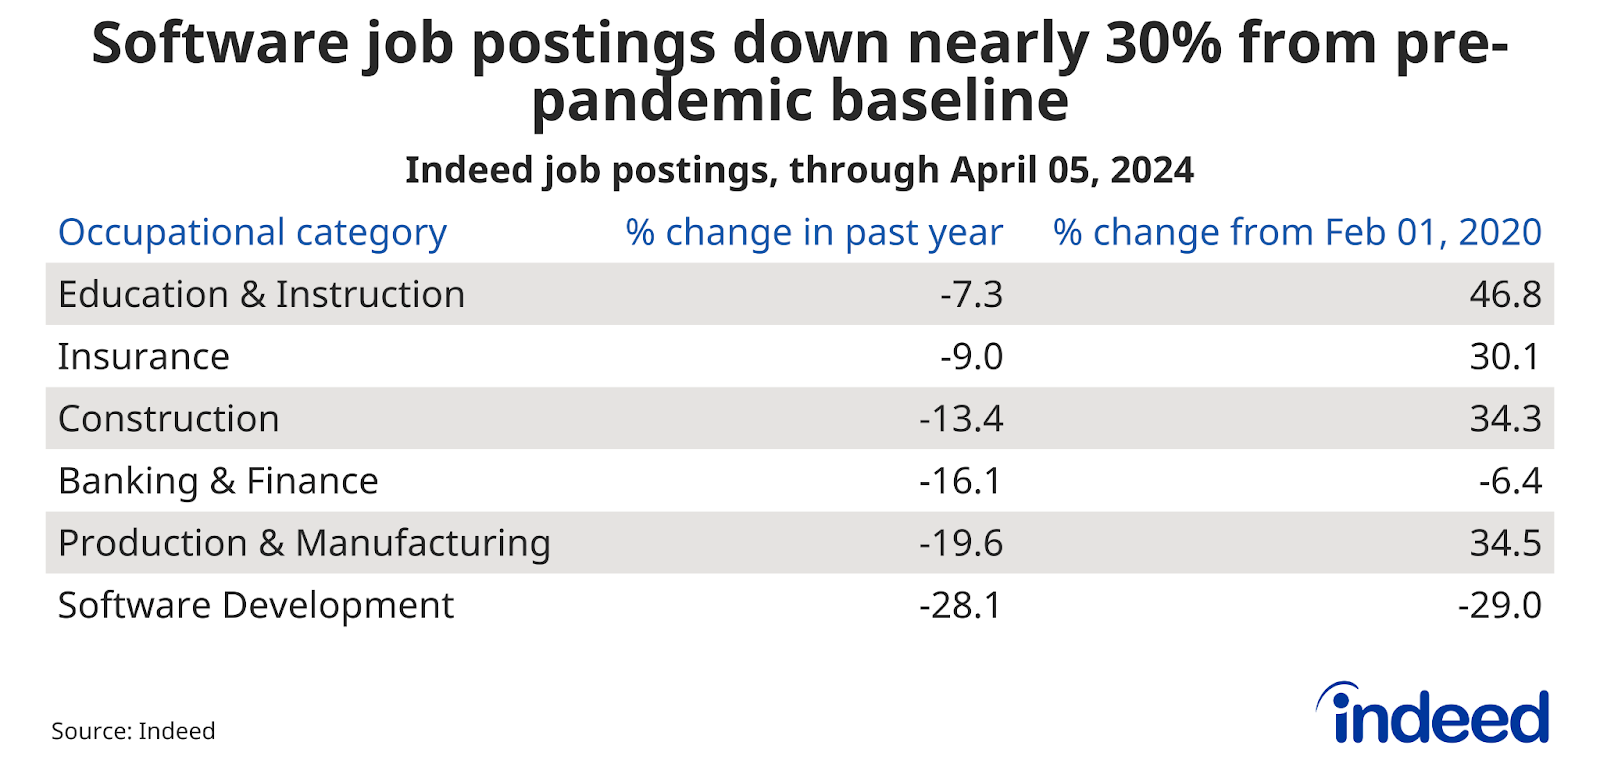 Table showing job posting trends, over the past year through April 5, 2024, and from the pre-pandemic baseline, for several B2B occupations. Education & Instruction job postings decreased 7.3% over the past year but remained up nearly 47% from their pre-pandemic baseline.